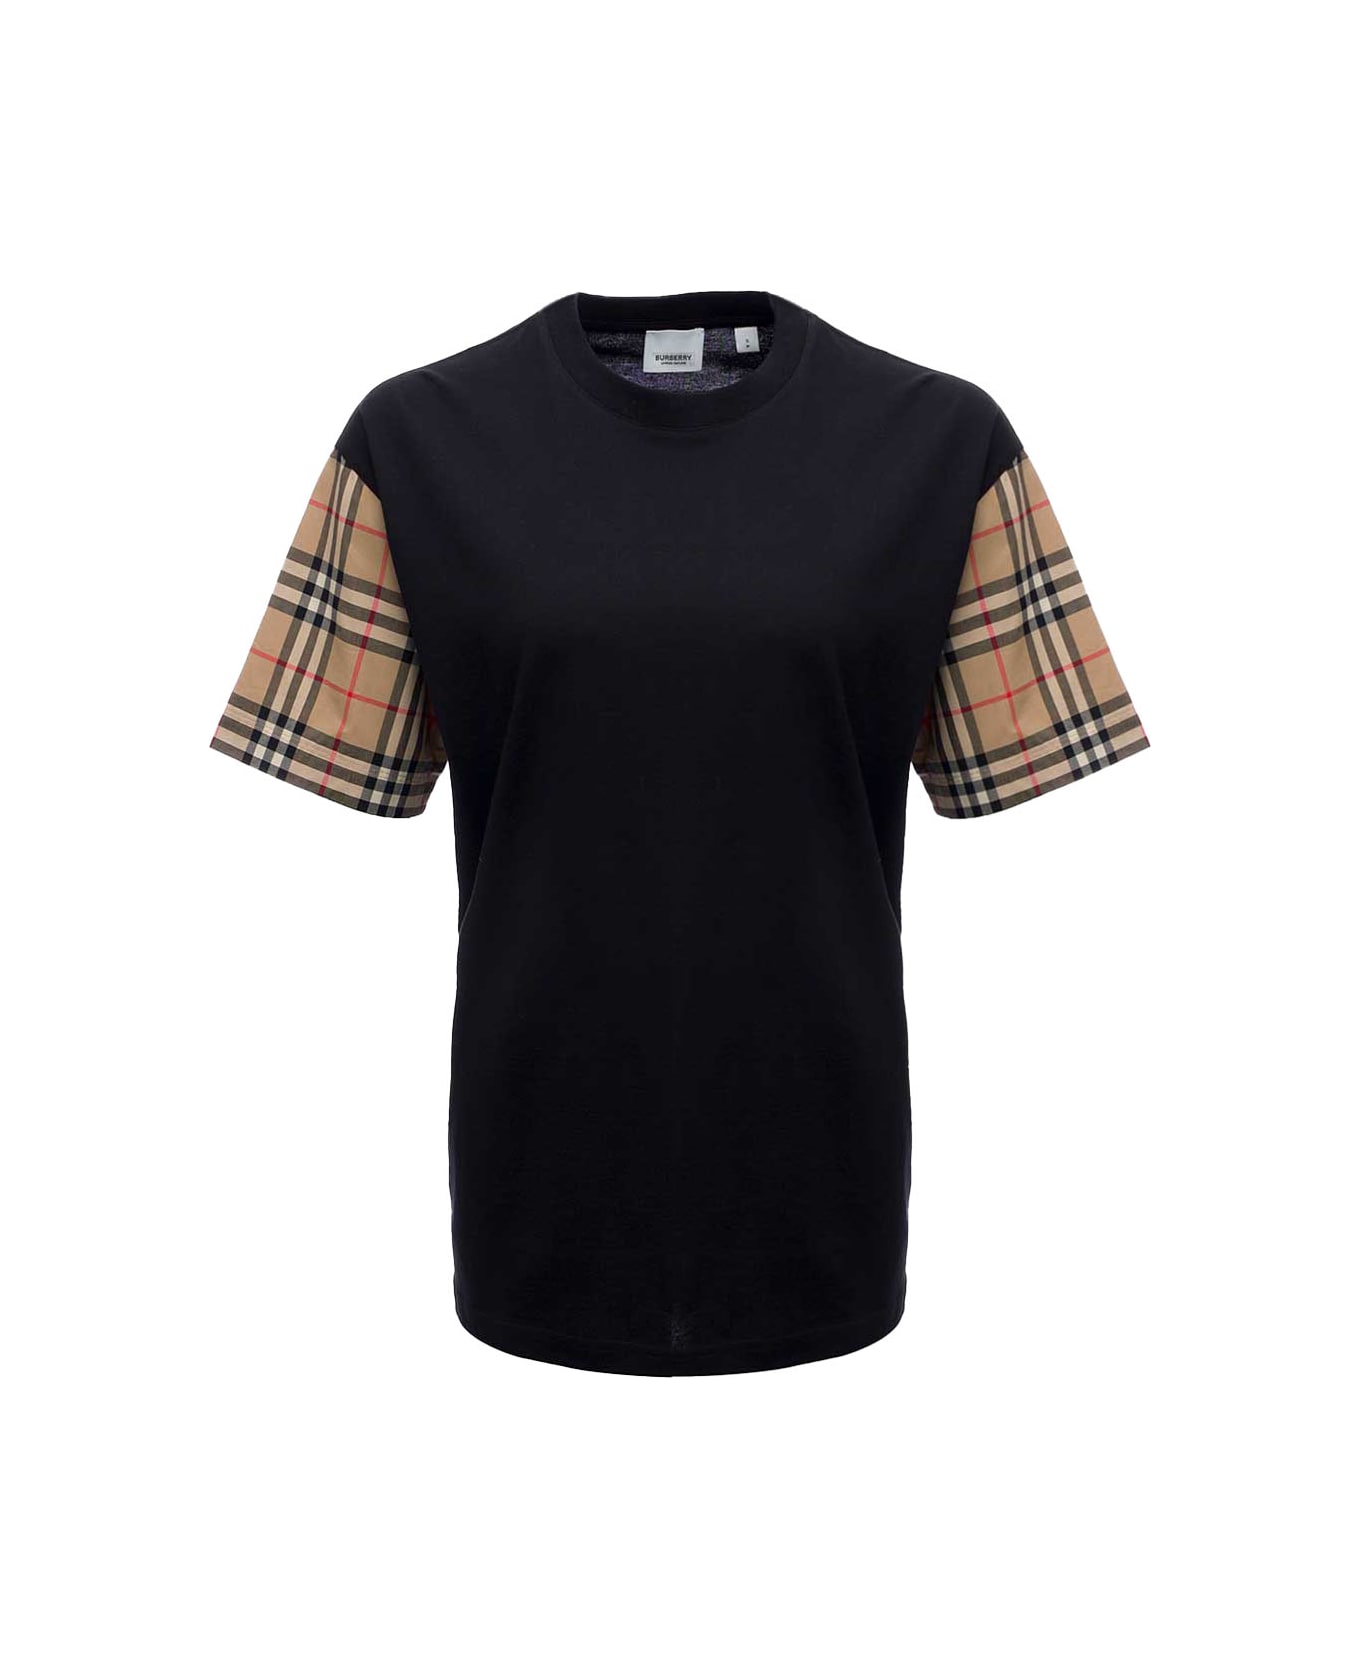 Burberry Black Cotton T-shirt With Vintage Check Sleeves - Black